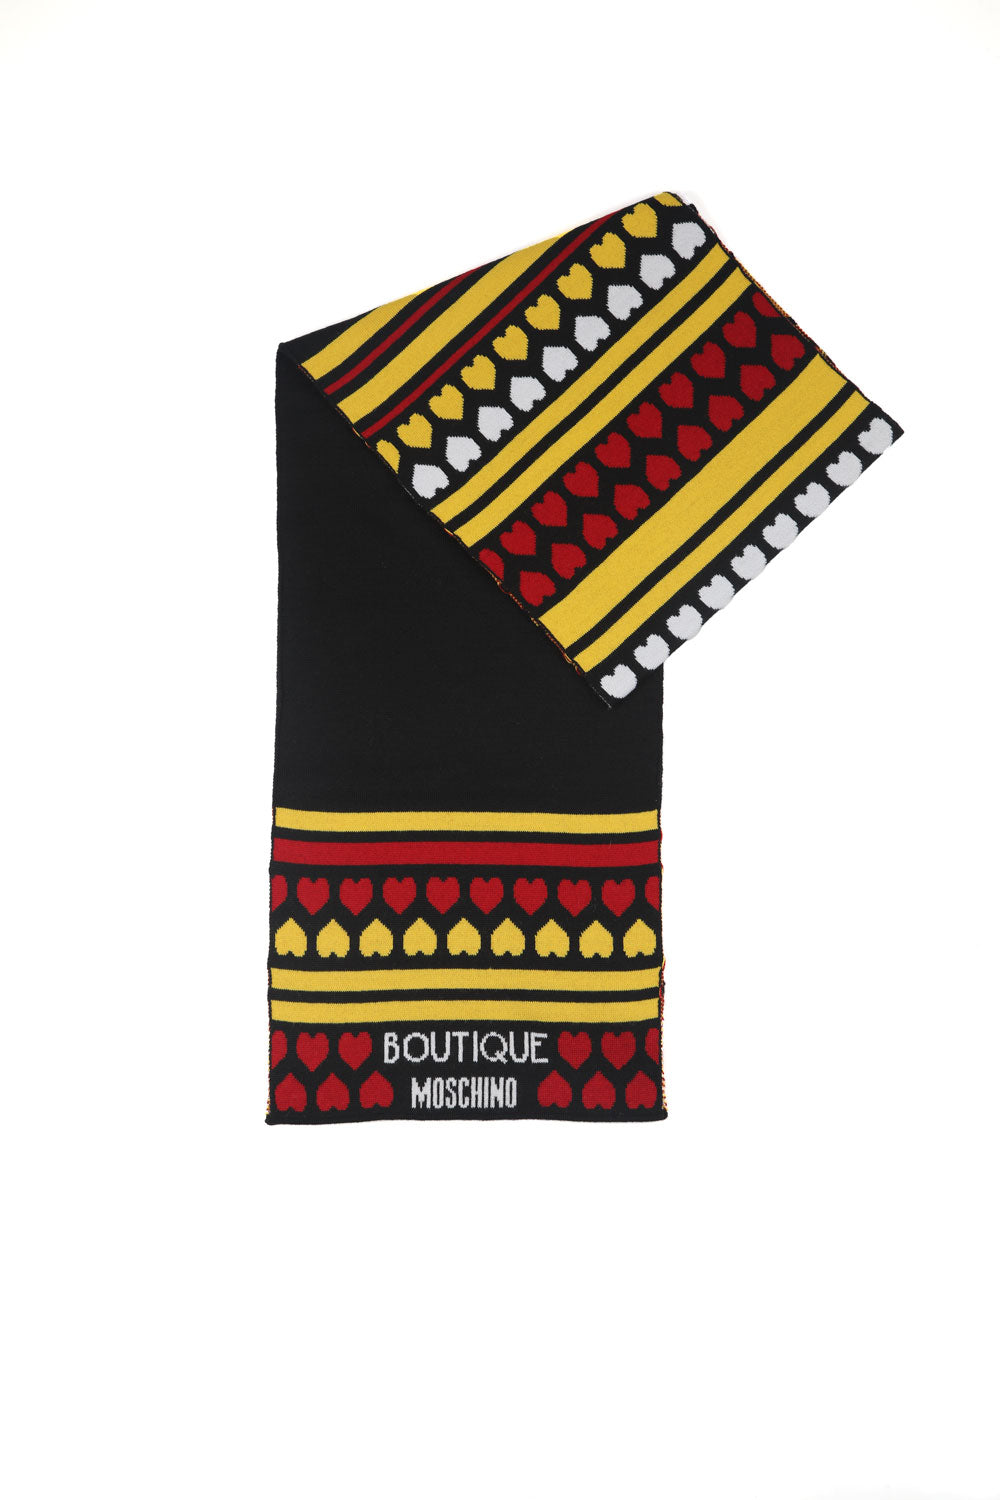 Boutique Moschino Patterned Scarf